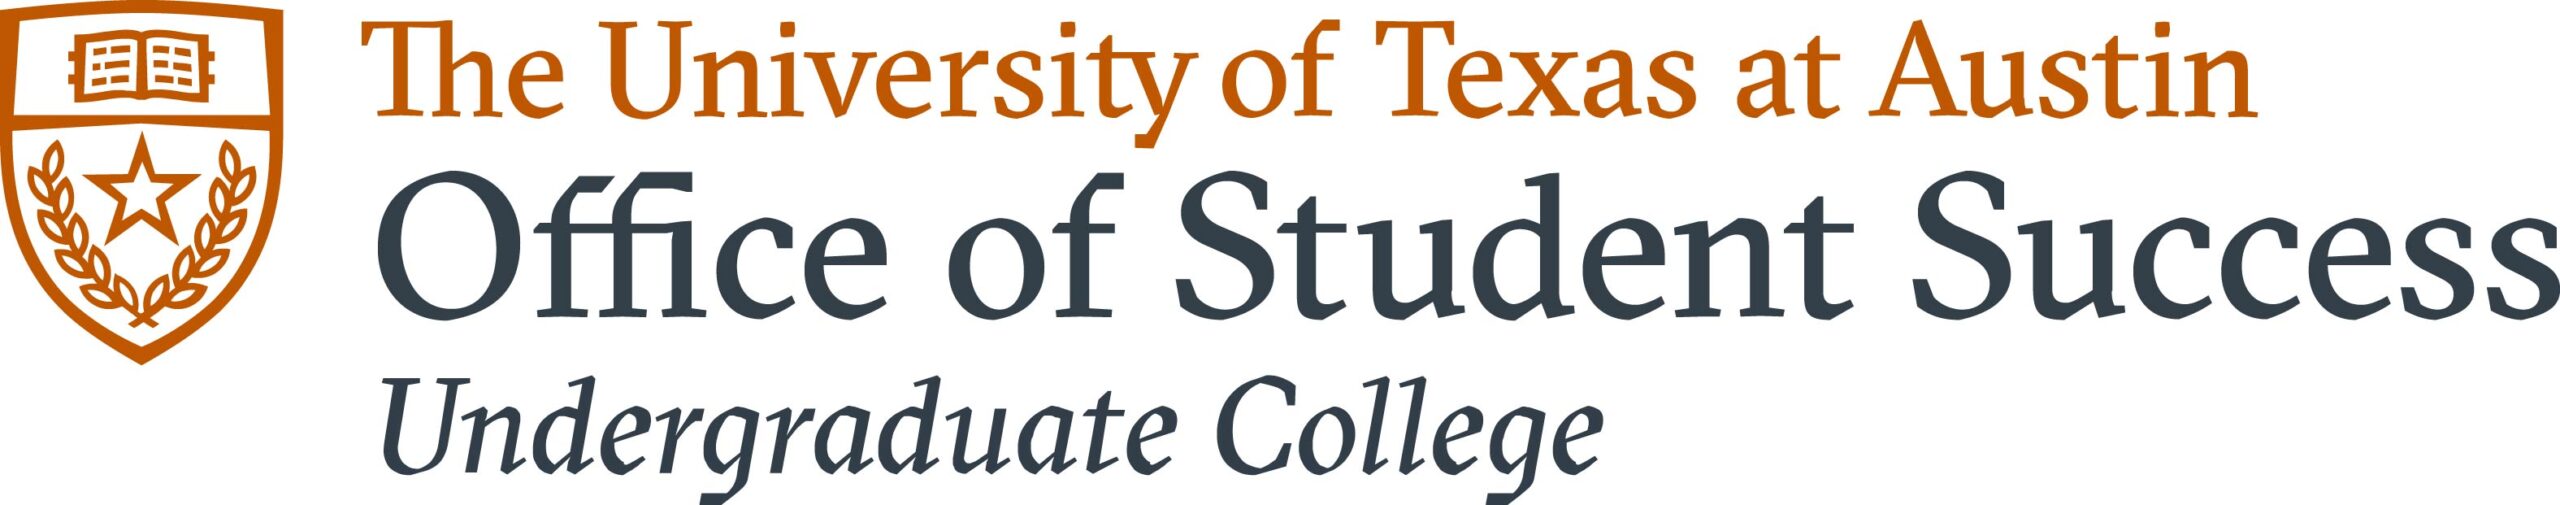 Office of Student Success logo